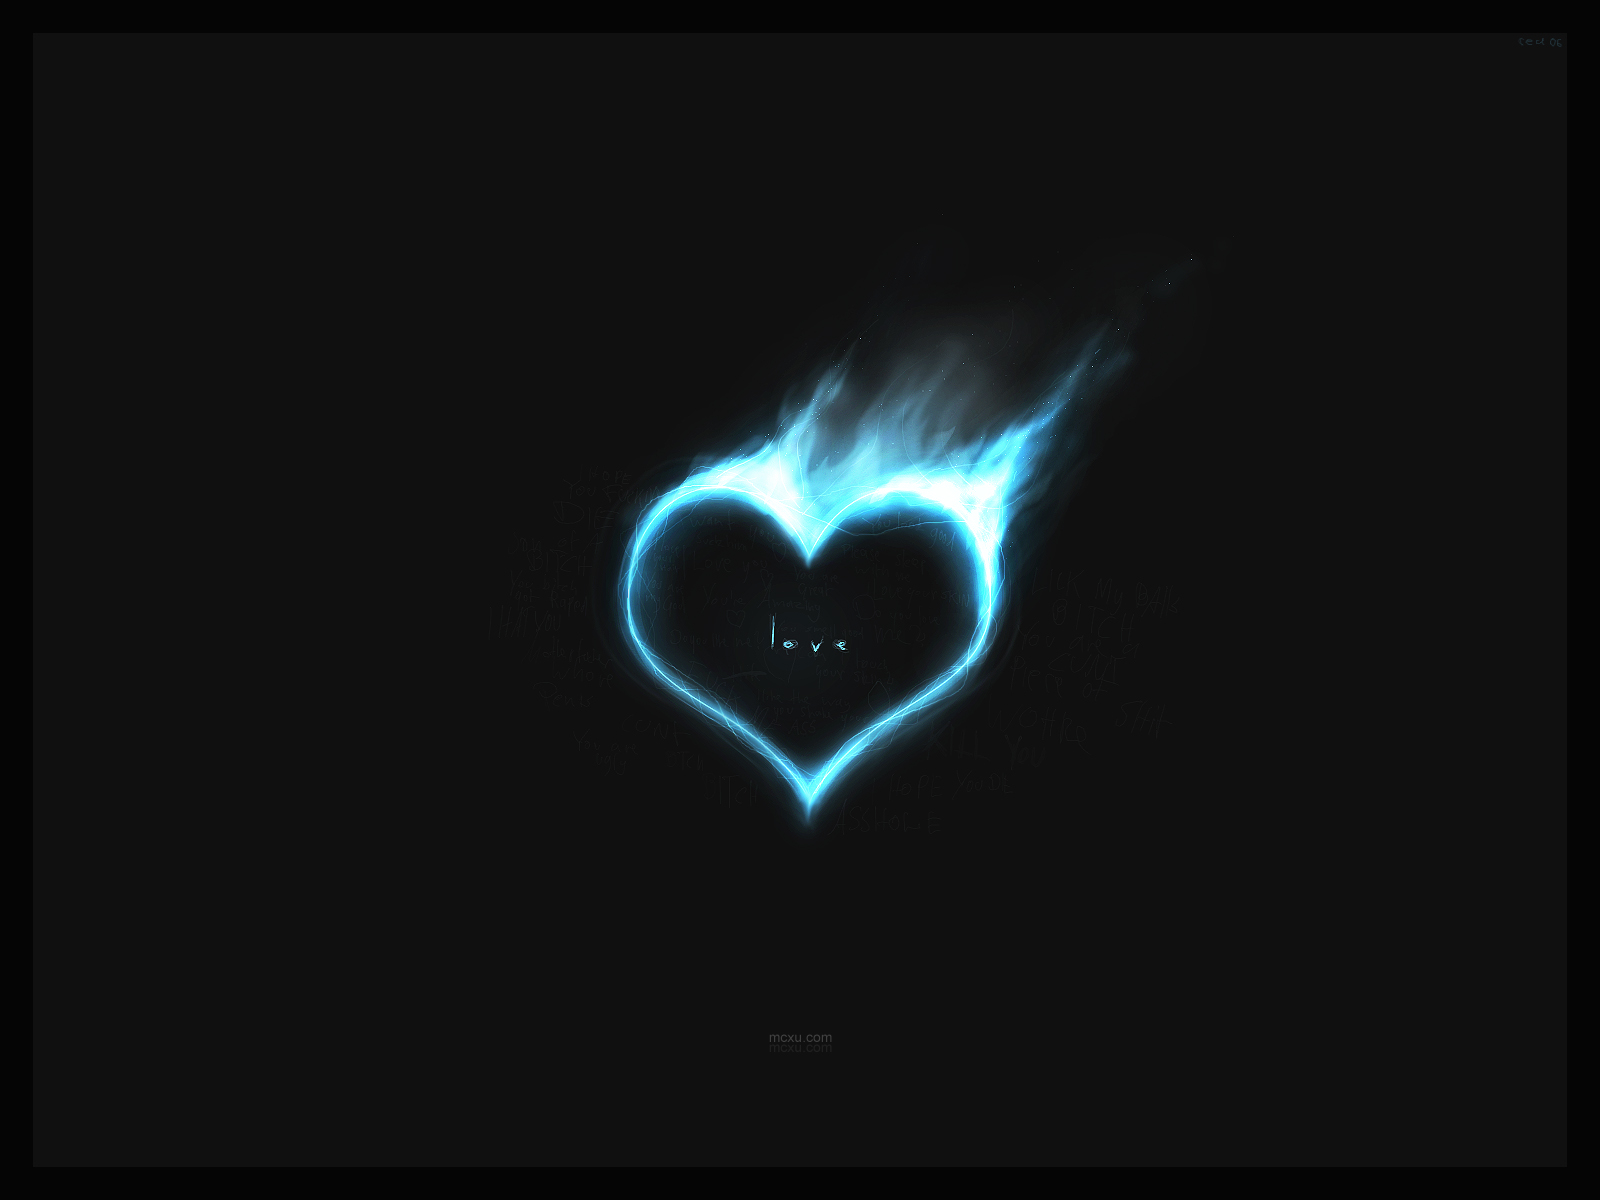 i hate you hd wallpaper,light,darkness,font,graphics,electric blue